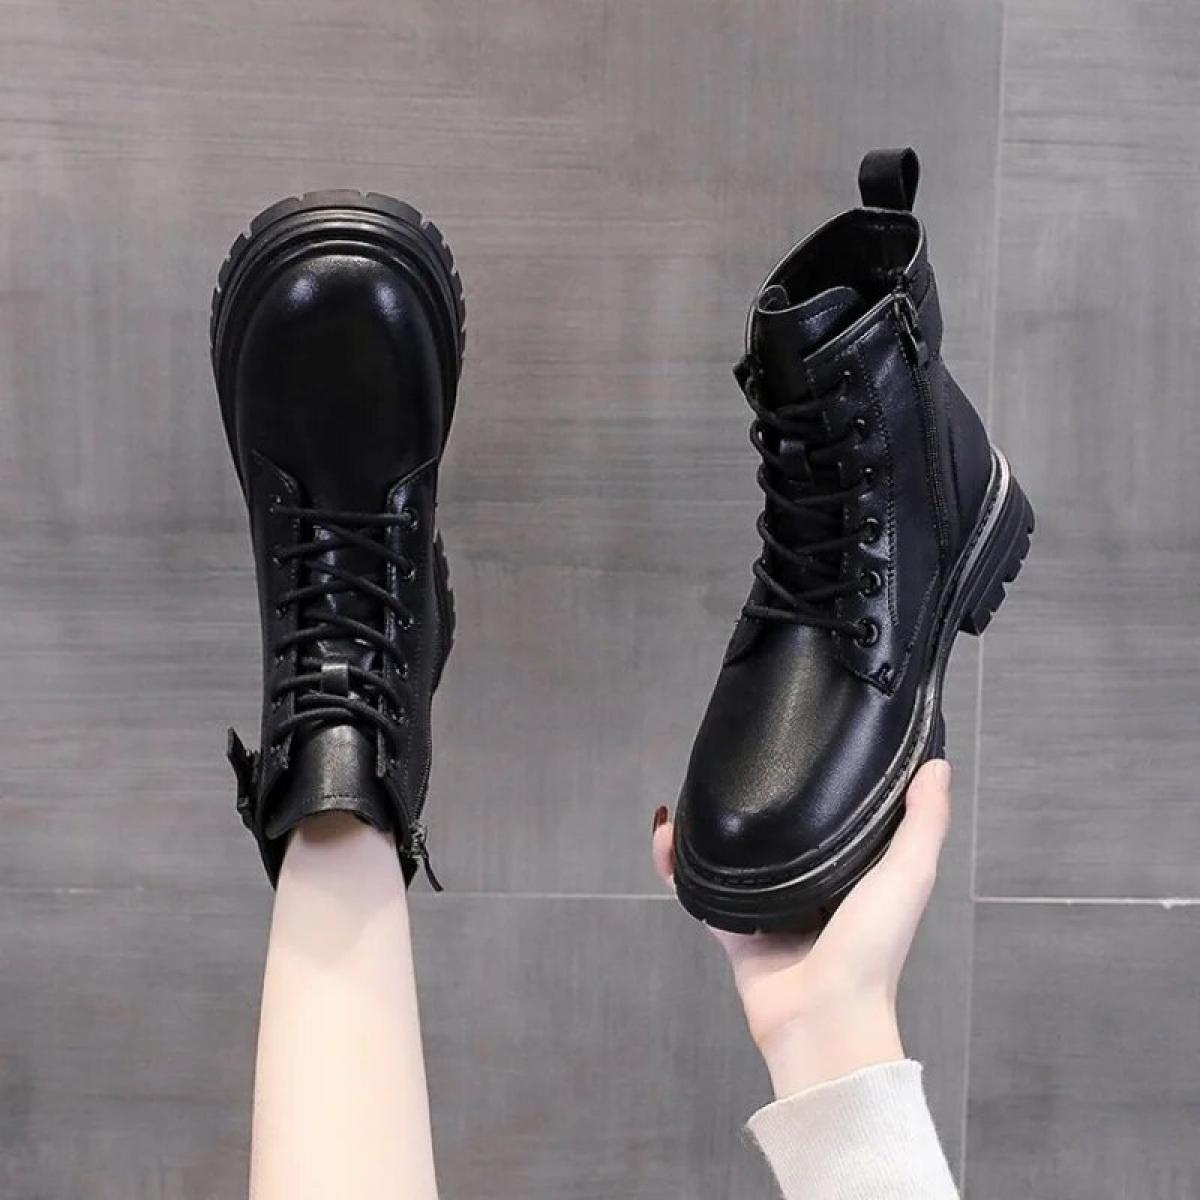 2022 New Black Pu Leather Ankle Boots Women Autumn Winter Round Toe Lace Up Zipper Shoes Woman Fashion Motorcycle Platfo